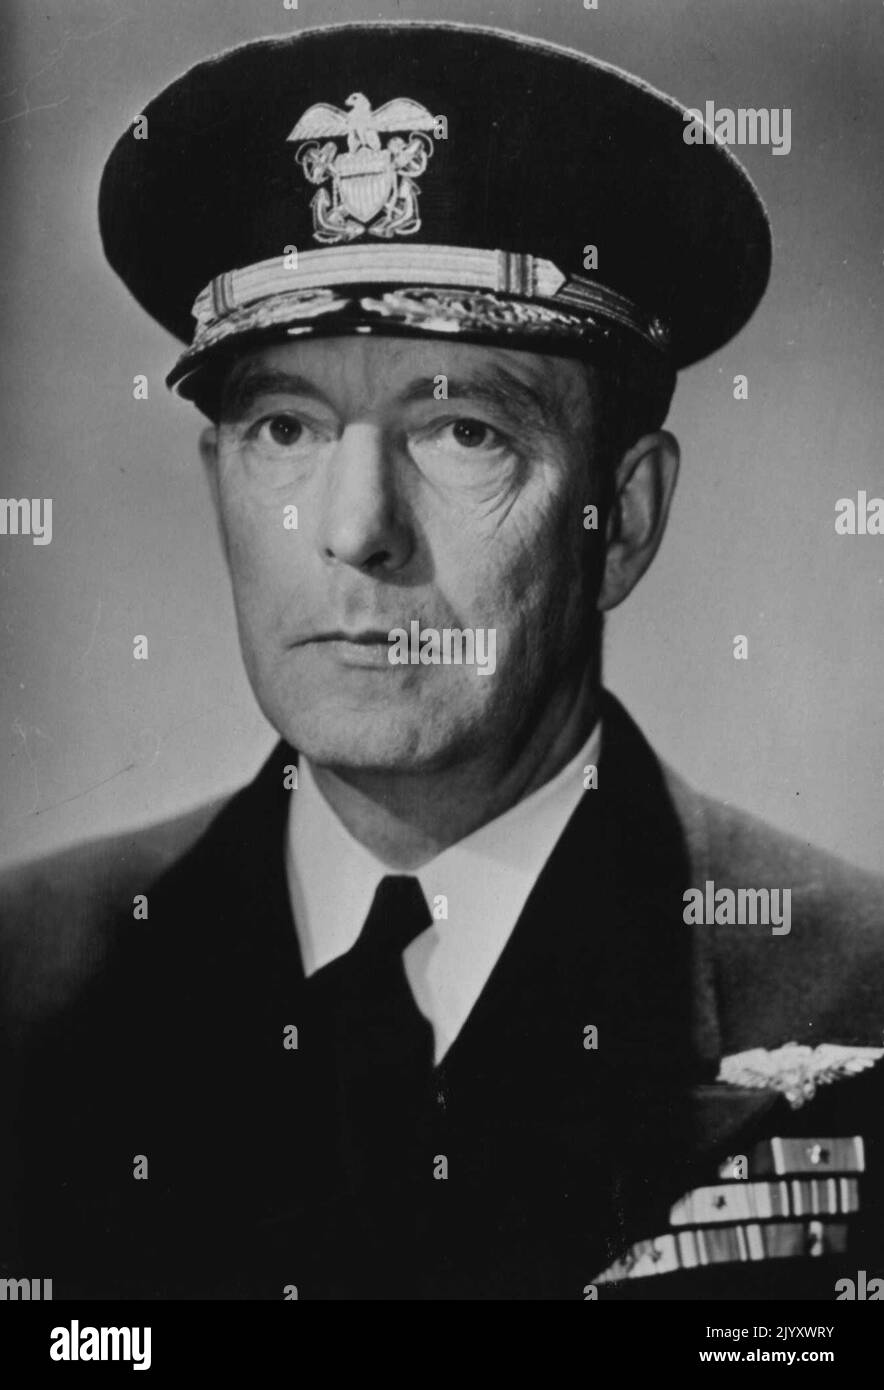 Arthur William Radford (Profile W-607) U.S. Vice Chief of Naval Operations. May 10, 1950. (Photo by United States Information Service). Stock Photo